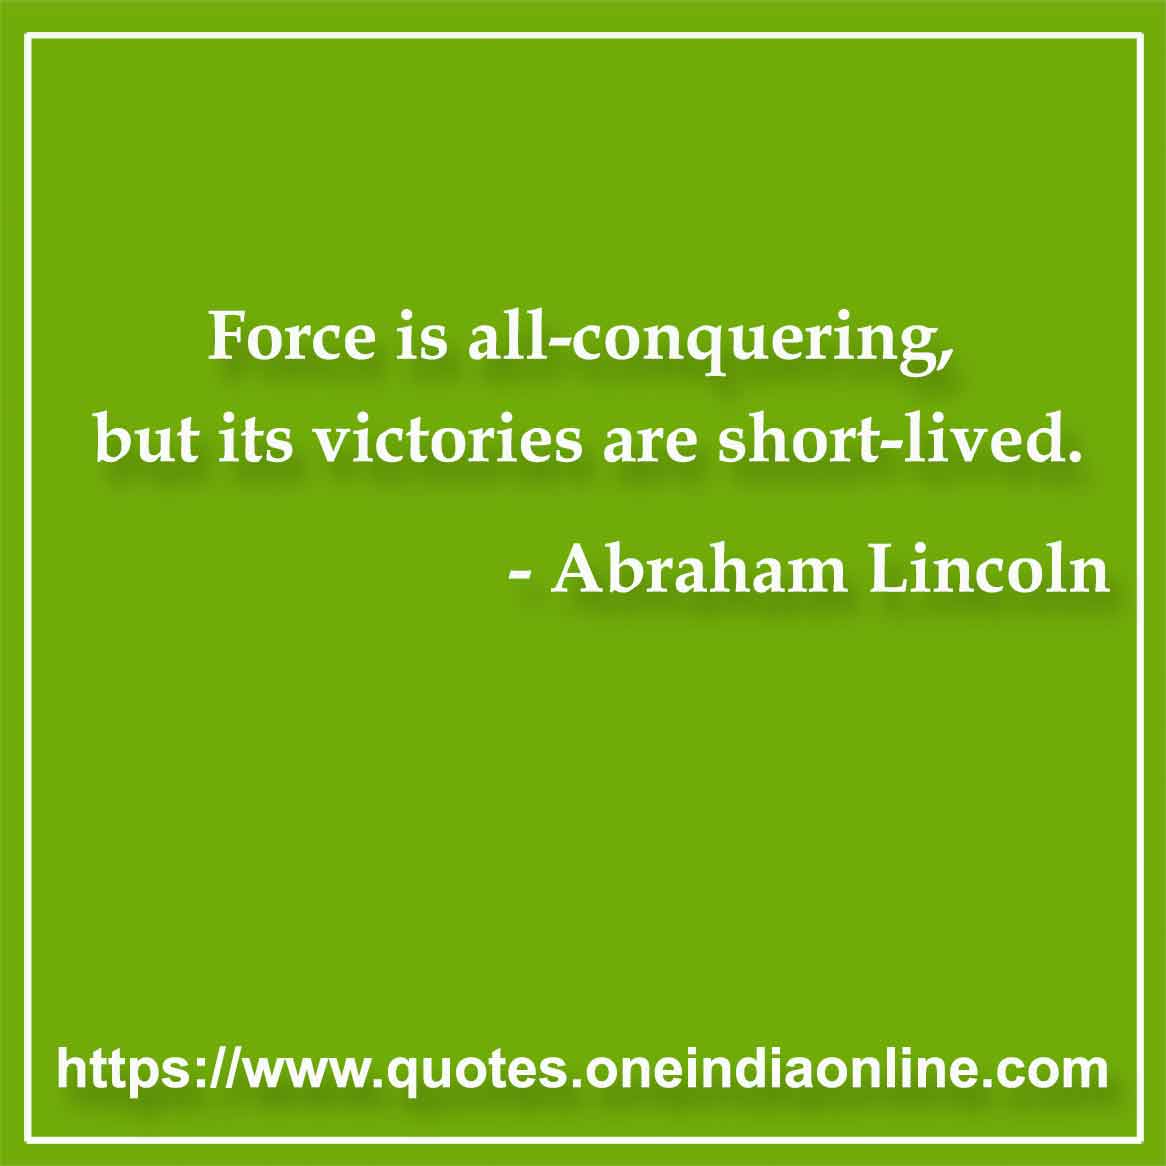 Force is all-conquering, but its victories are short-lived.

- Victory Quotes by Abraham Lincoln